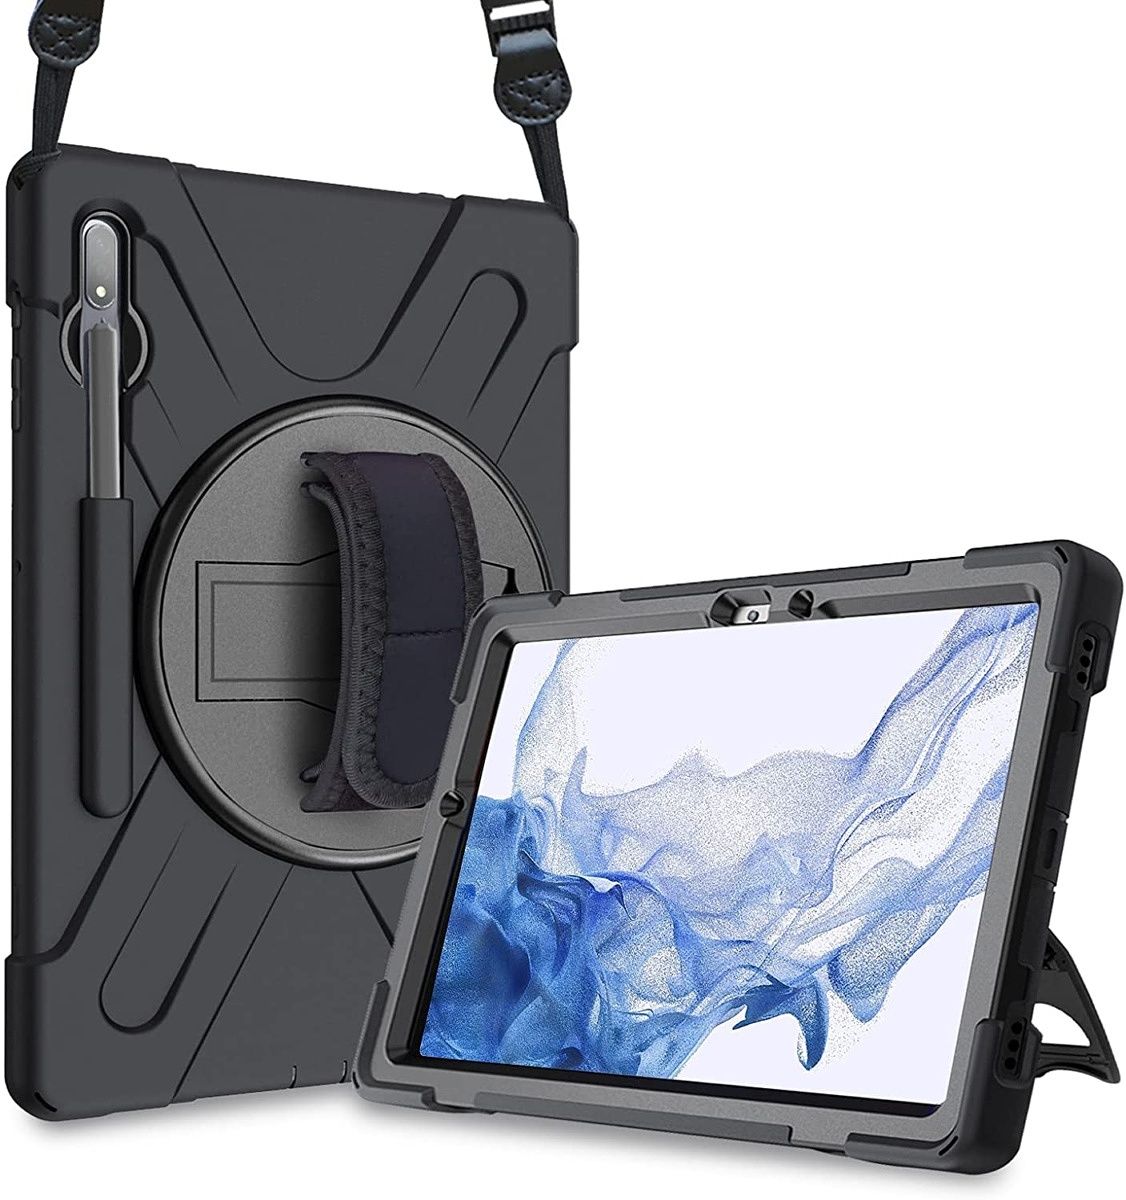 This shockproof case comes with a shoulder strap to easily carry it around. It also has a rotating kickstand for versatility. It's ideal for those who work on their tablets in rough environments.